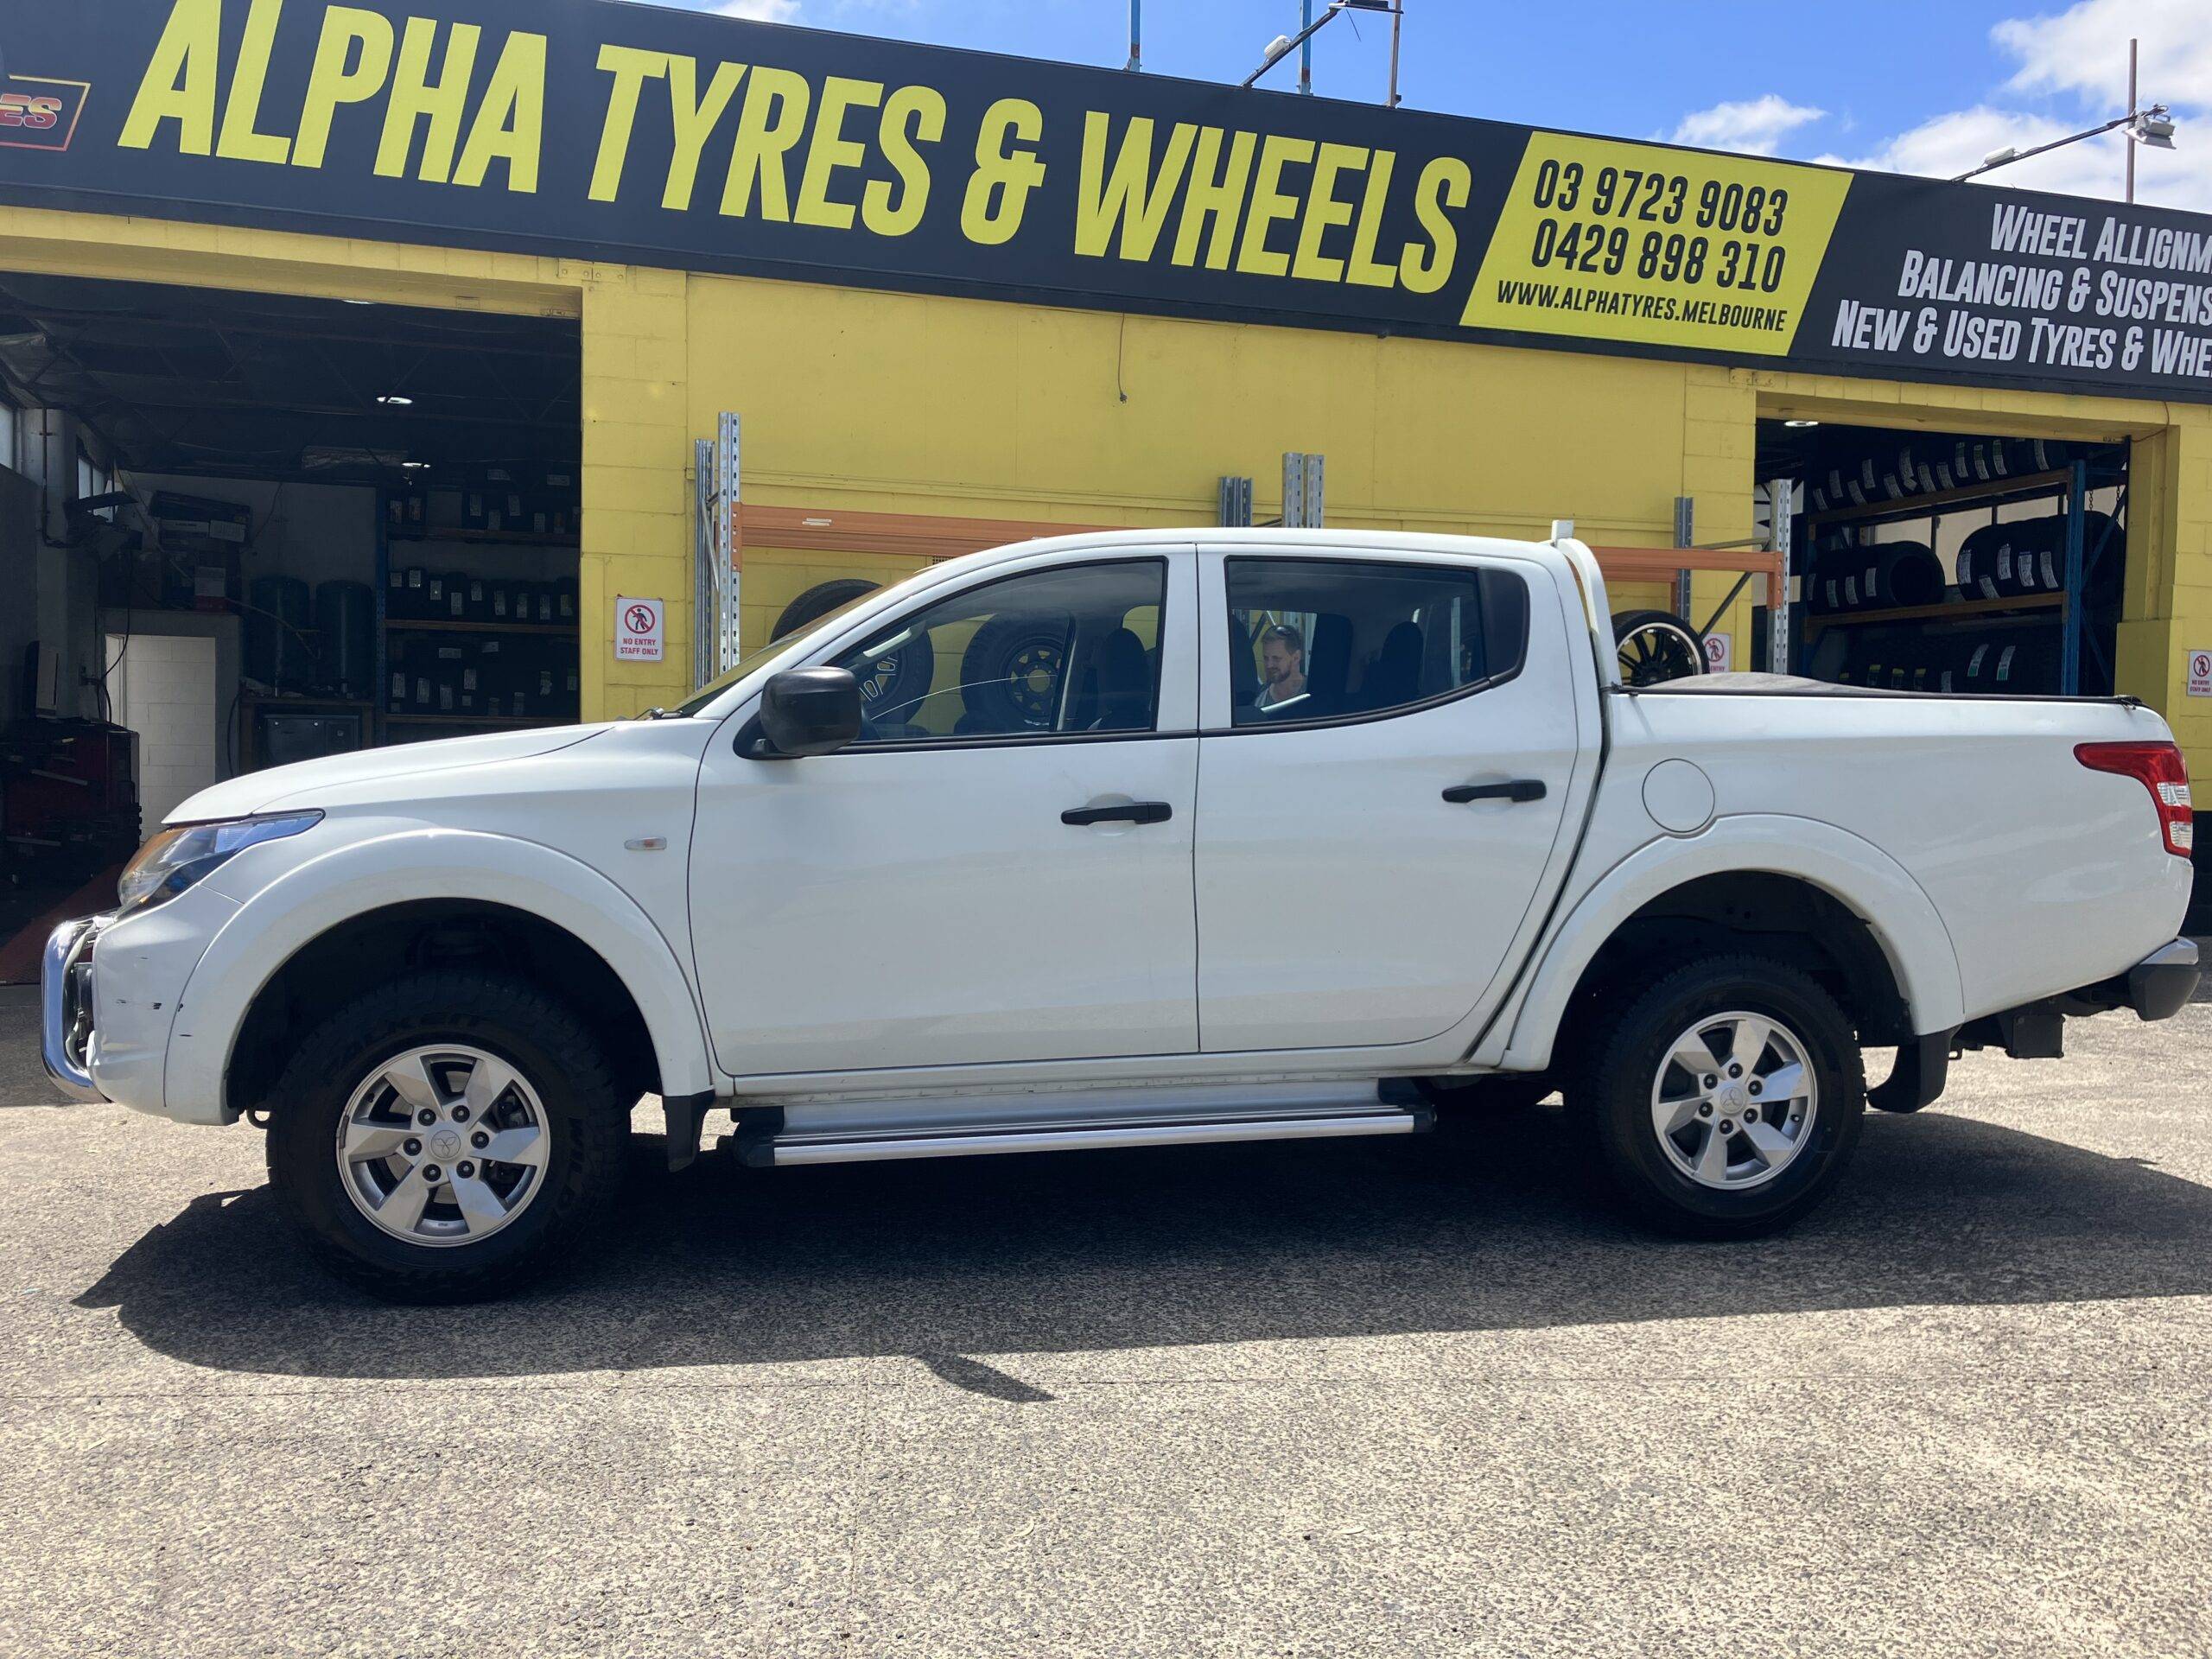 Alpha tyres and wheels tyre shop in lilsyth tyre change